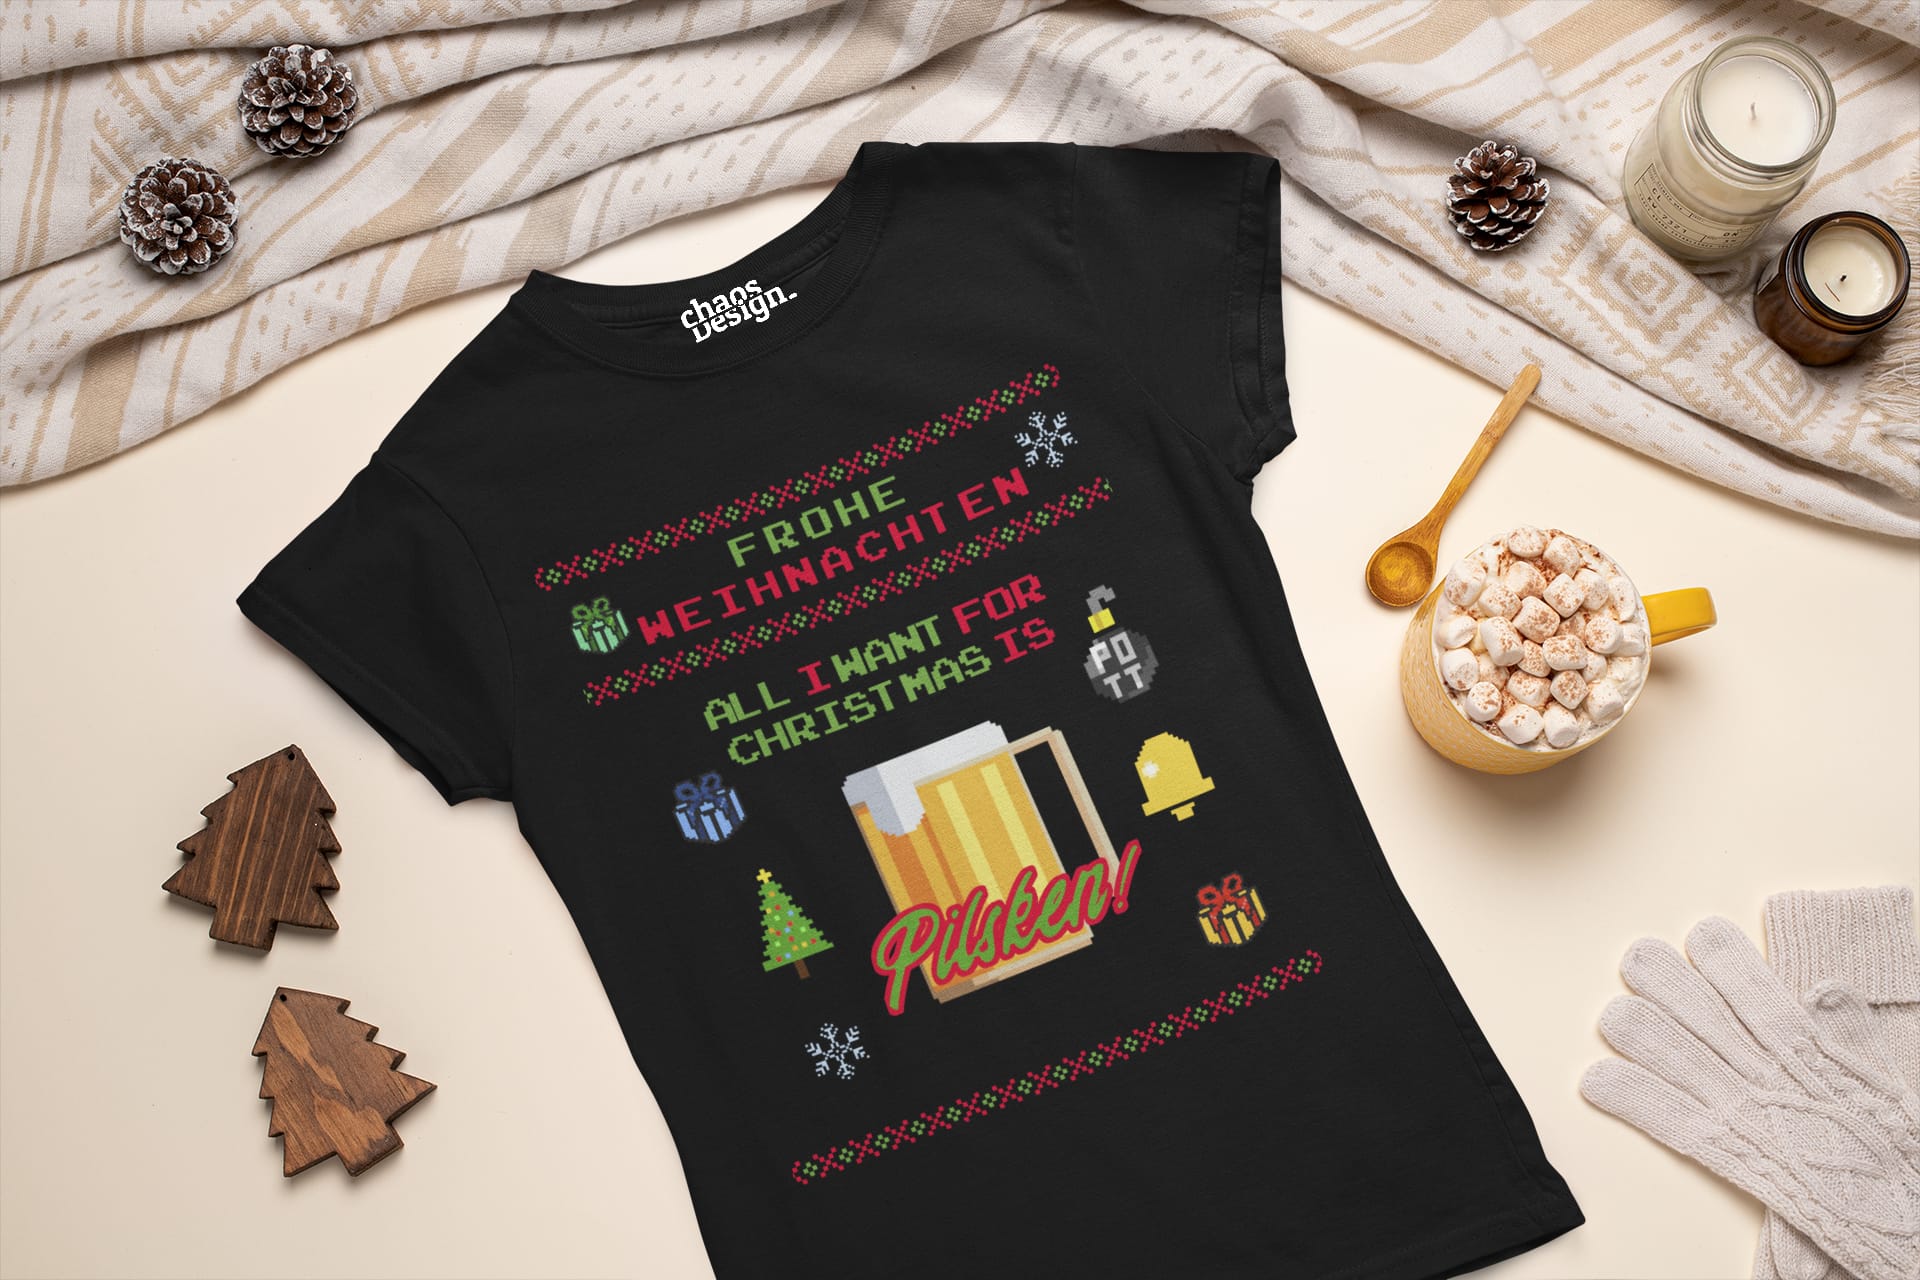 T-Shirt "all i want for christmas - Pilsken"